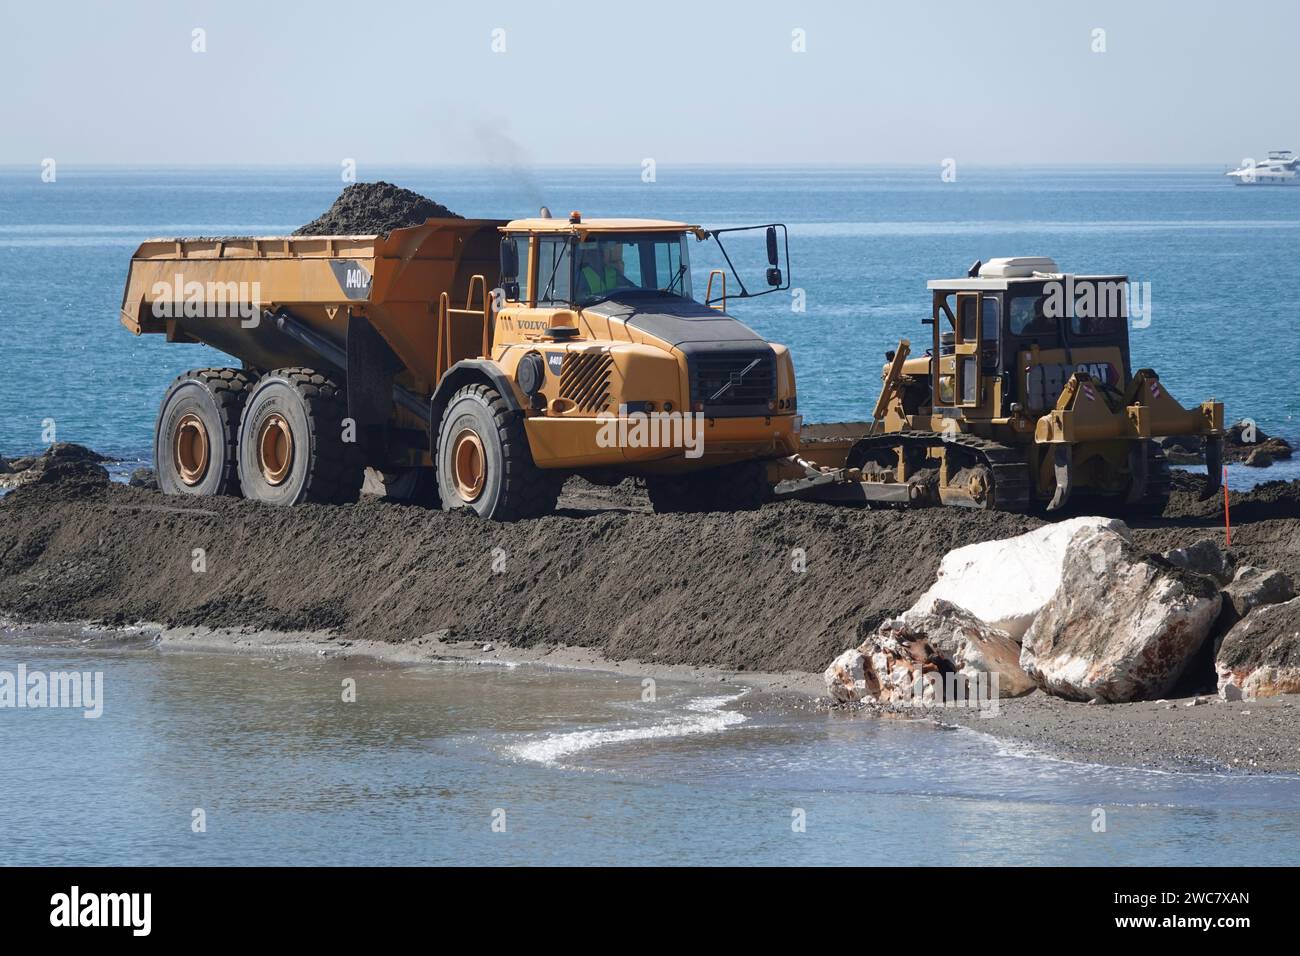 A Volvo A40D articulated hauler working on a coastal work site Stock Photo